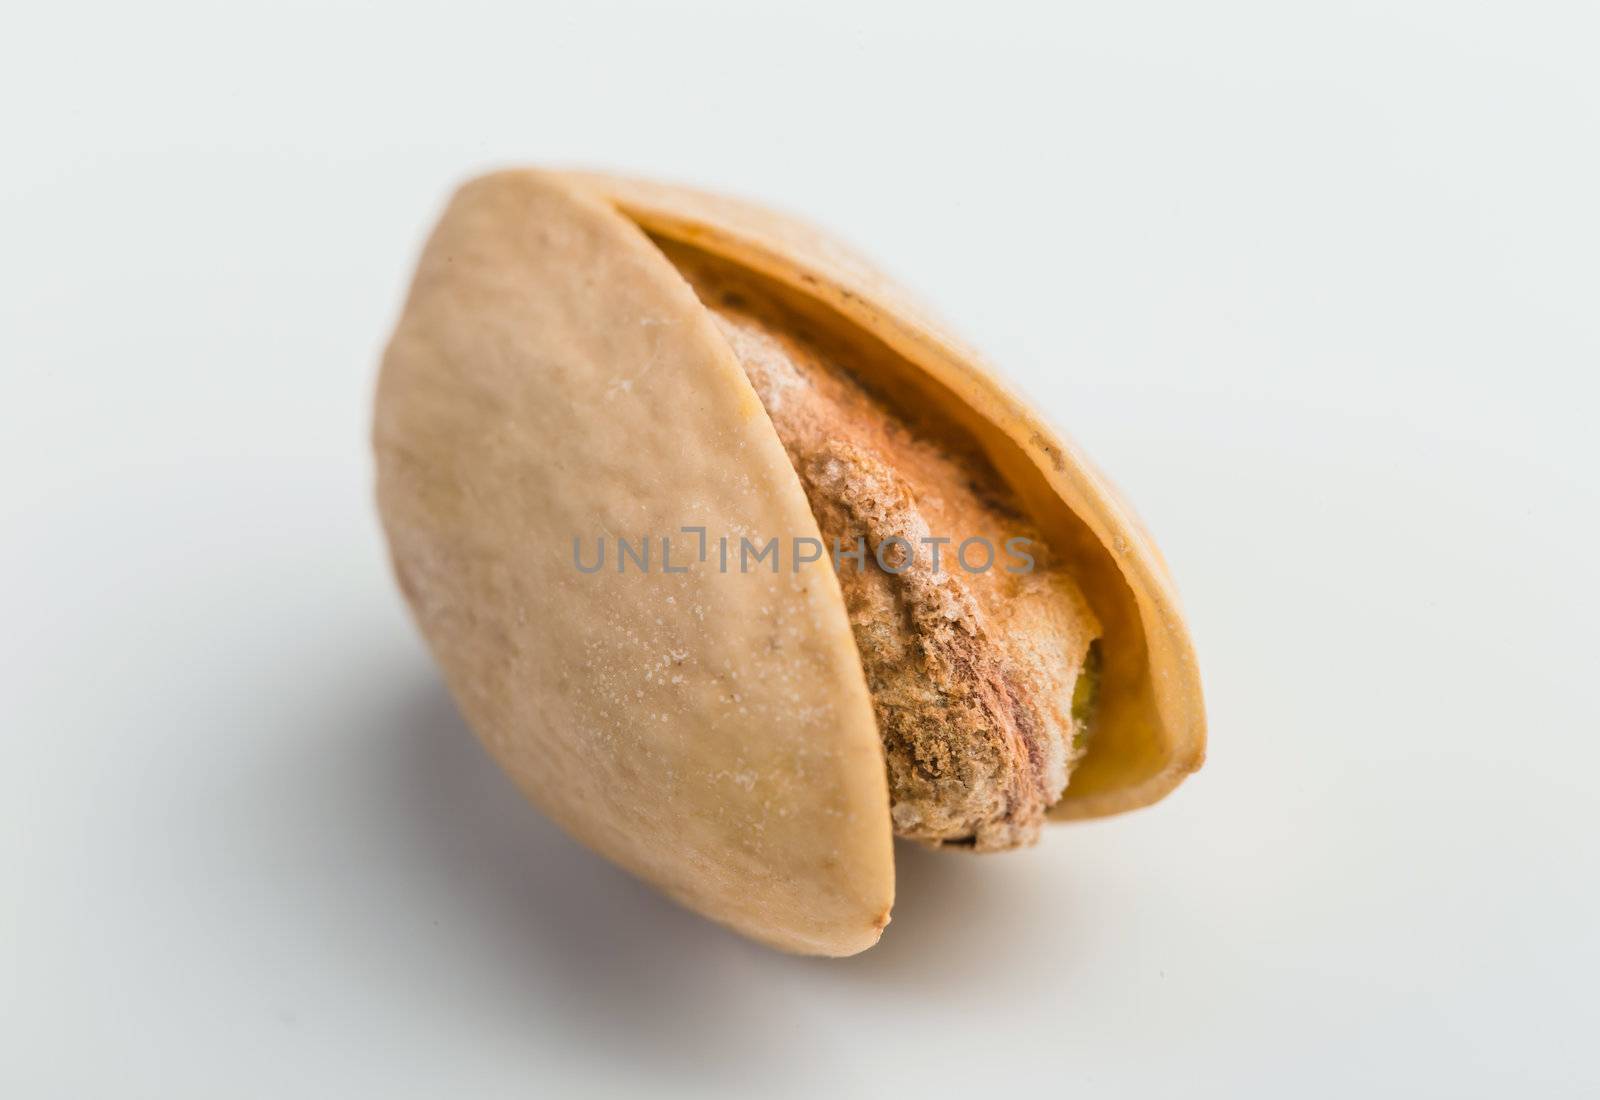 The dry pistachio on the white background